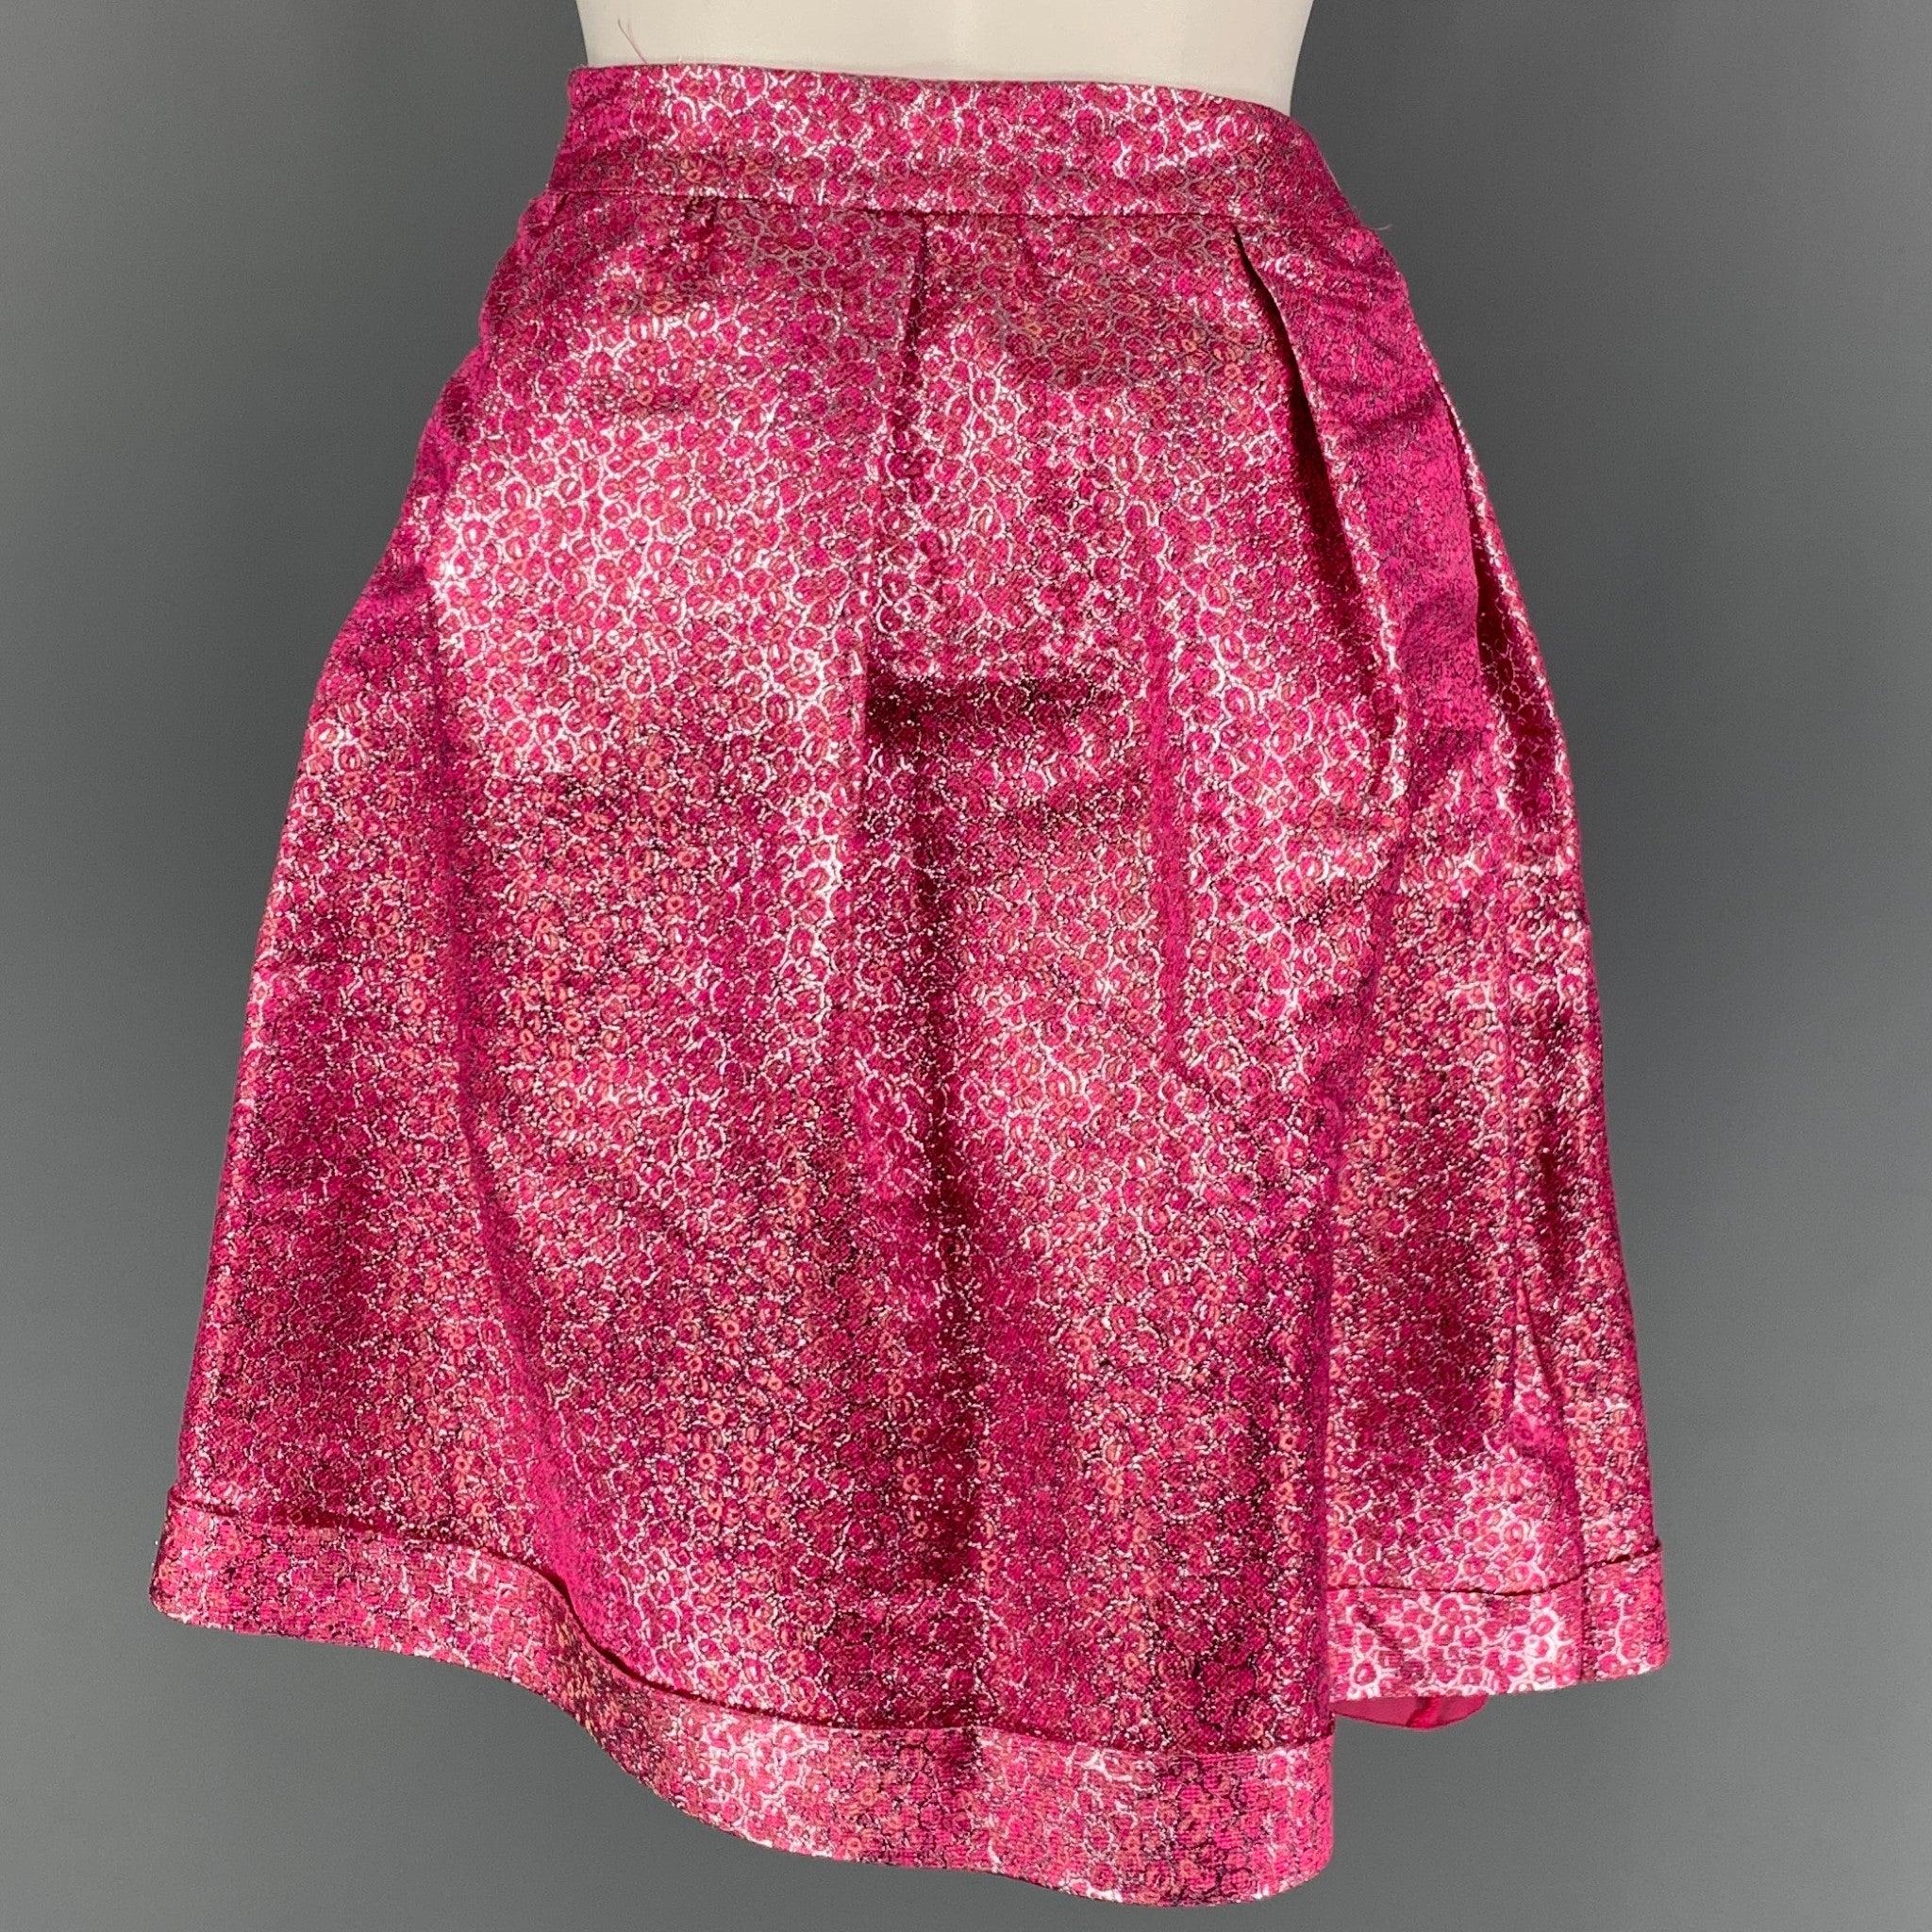 BURBERRY PRORSUM Size 4 Pink Metallic Polyester Silk Sparkly Pleated Skirt In Good Condition For Sale In San Francisco, CA